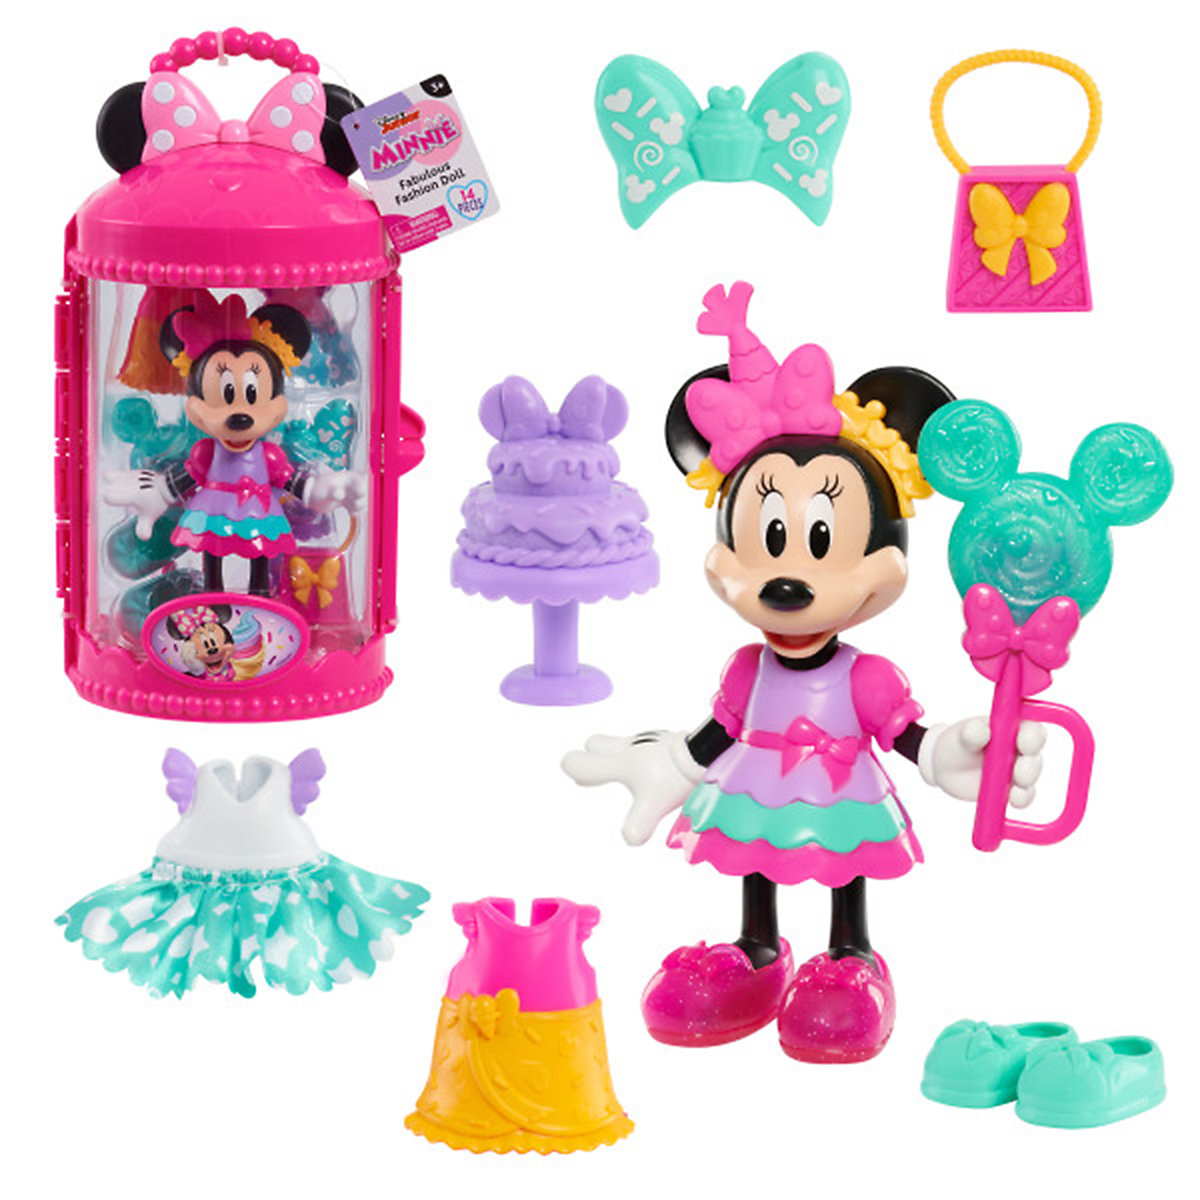 Minnie Mouse Fashion Doll Sweet Party